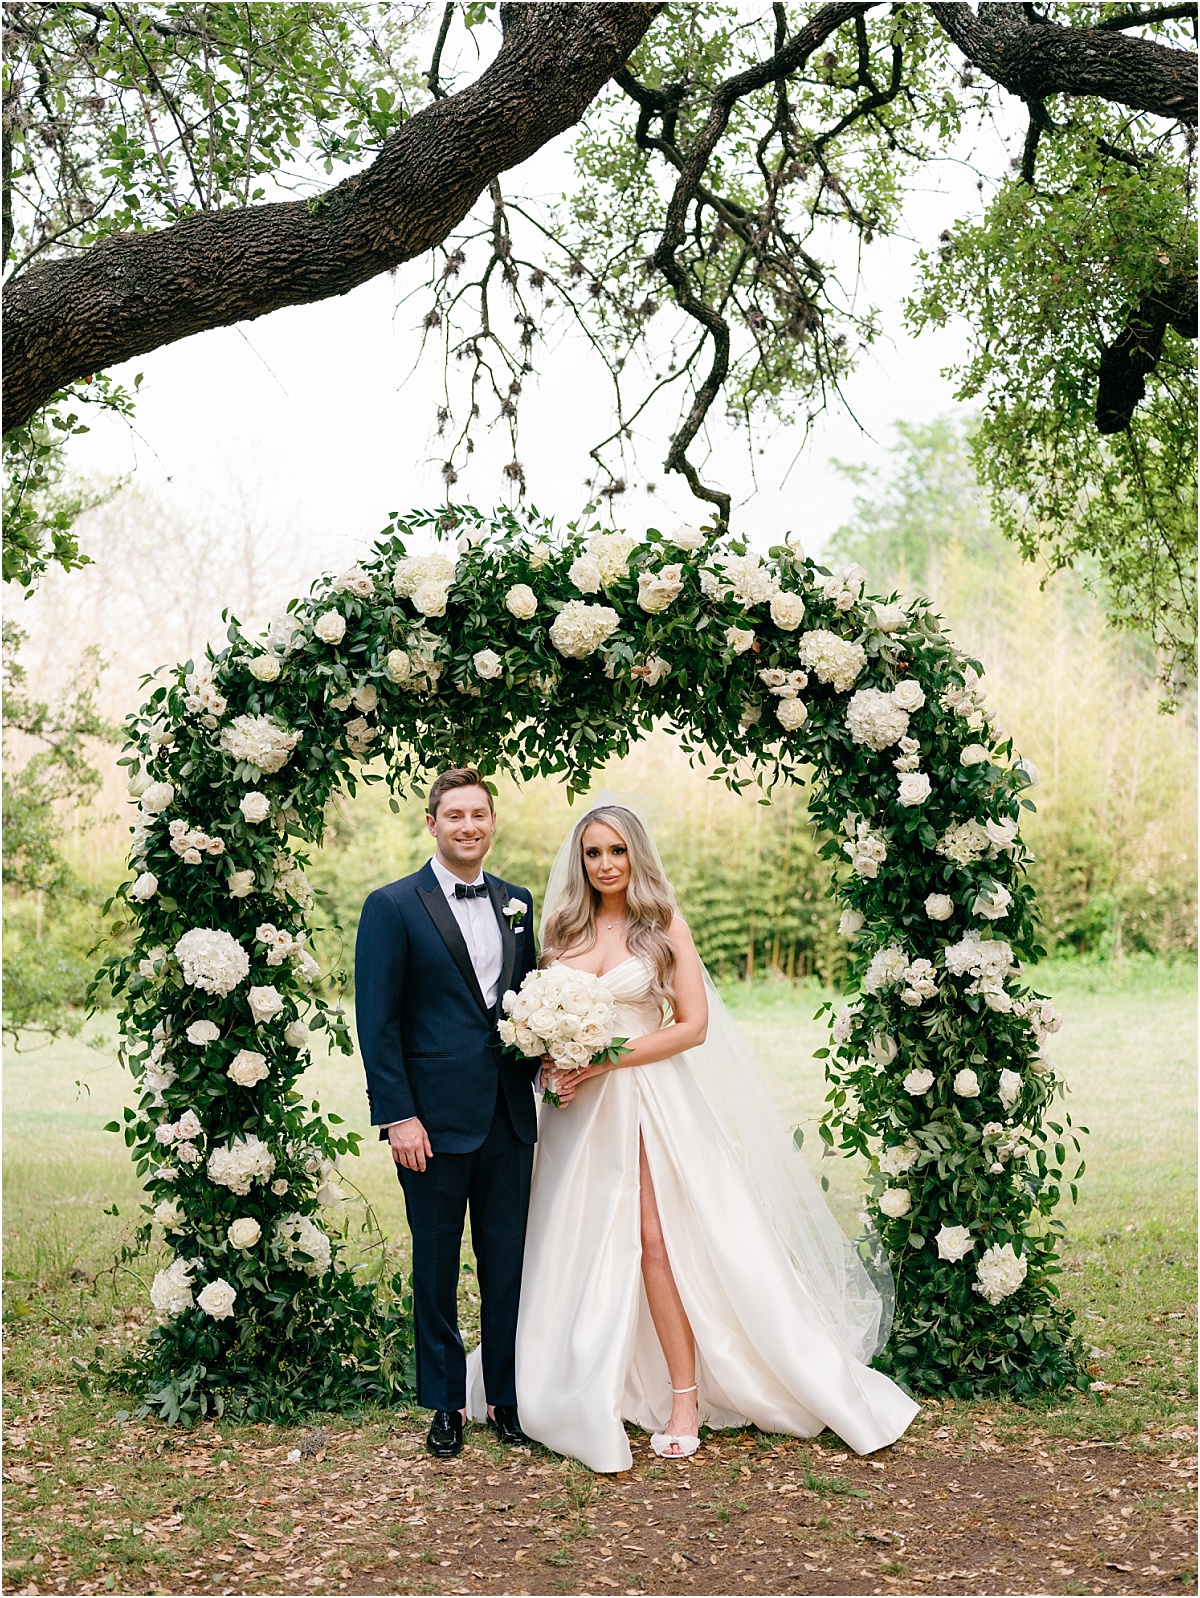 Bride and Groom standing in front of ceremony arch at Mattie's Austin wedding.